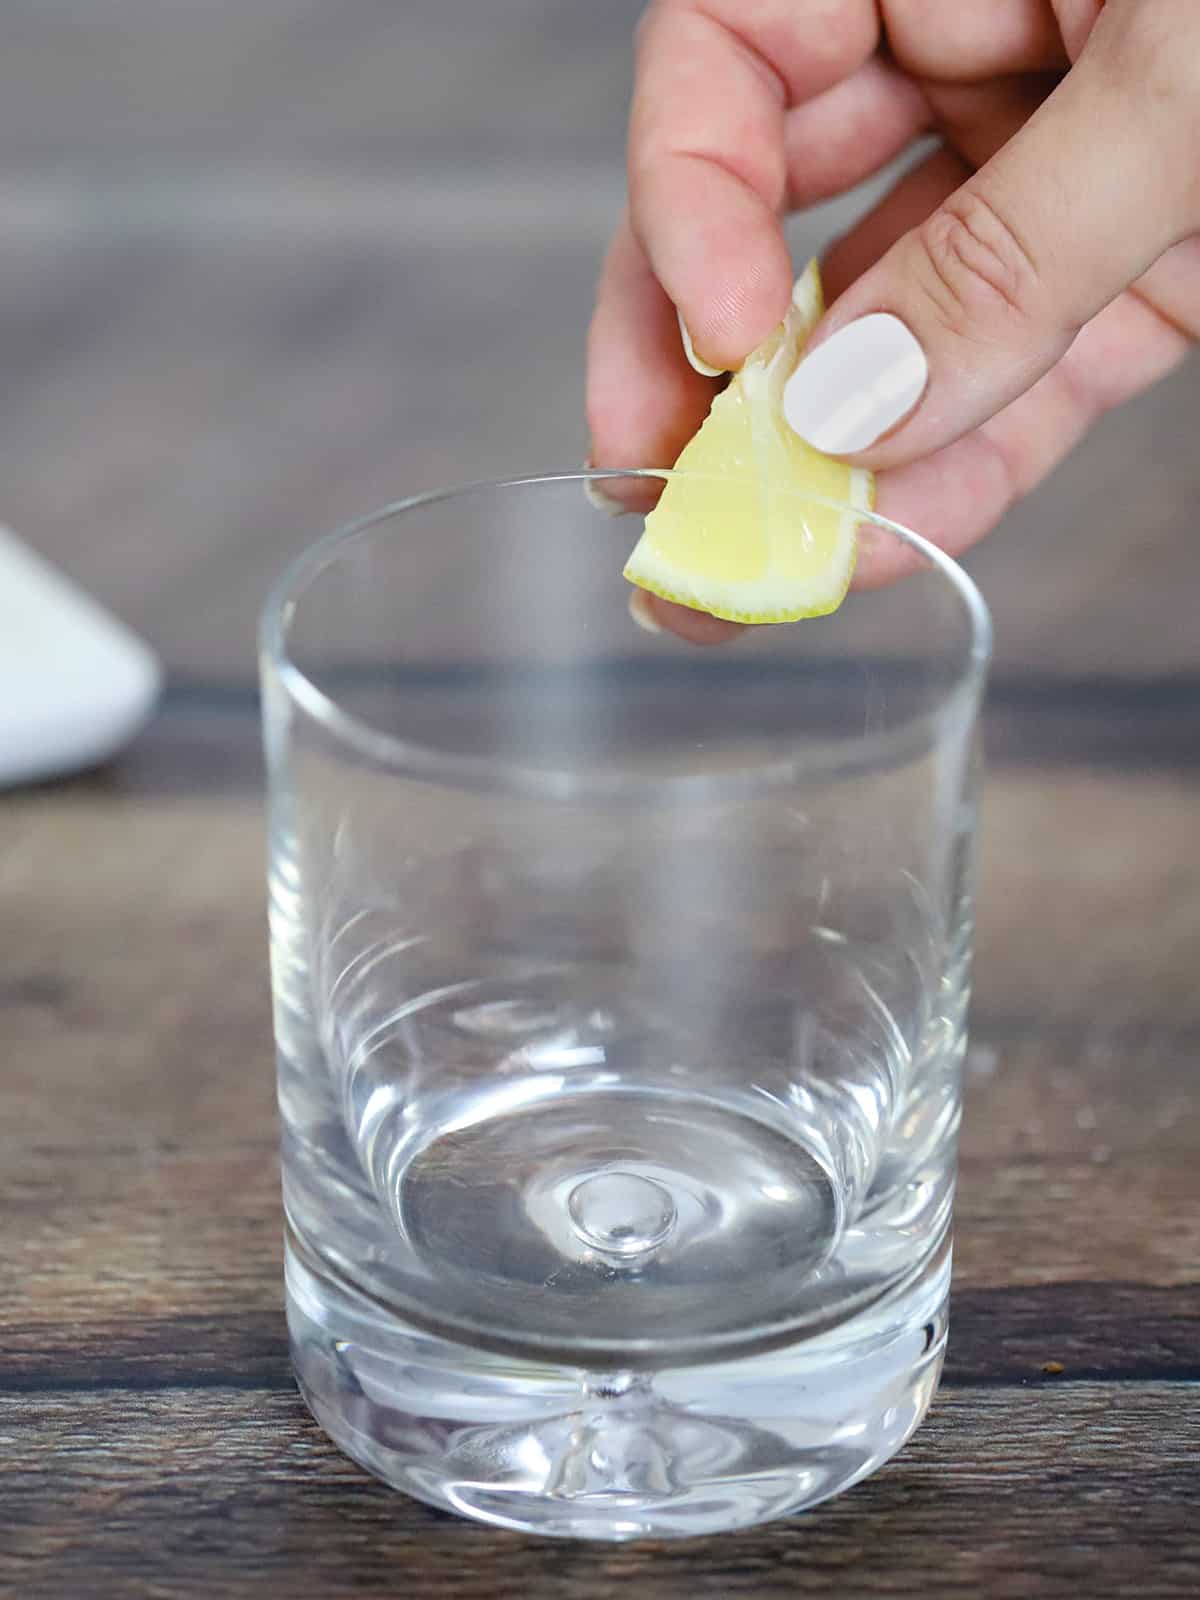 A hand running a slice of lime around the rim of a glass.